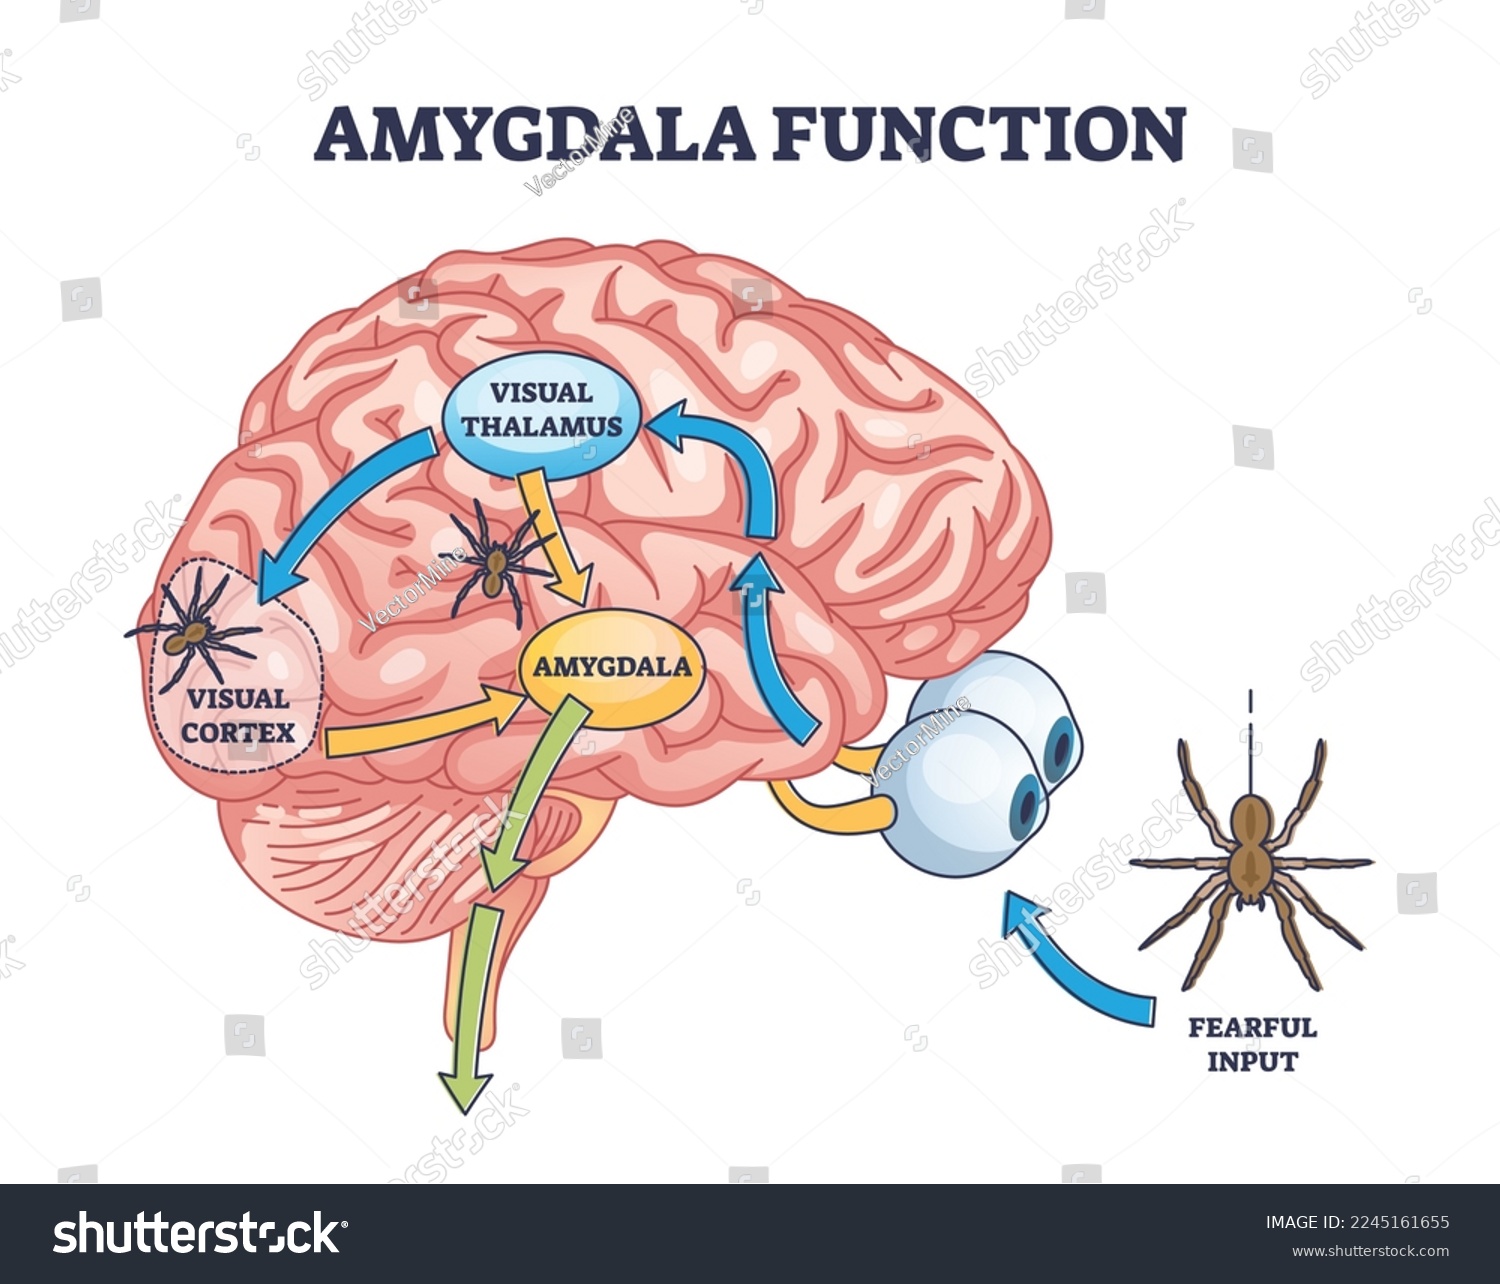 SVG of Amygdala function with brain response to fear stimulus outline diagram. Labeled educational medical scheme with fearful threat input, visual thalamus and cortex connection process vector illustration svg